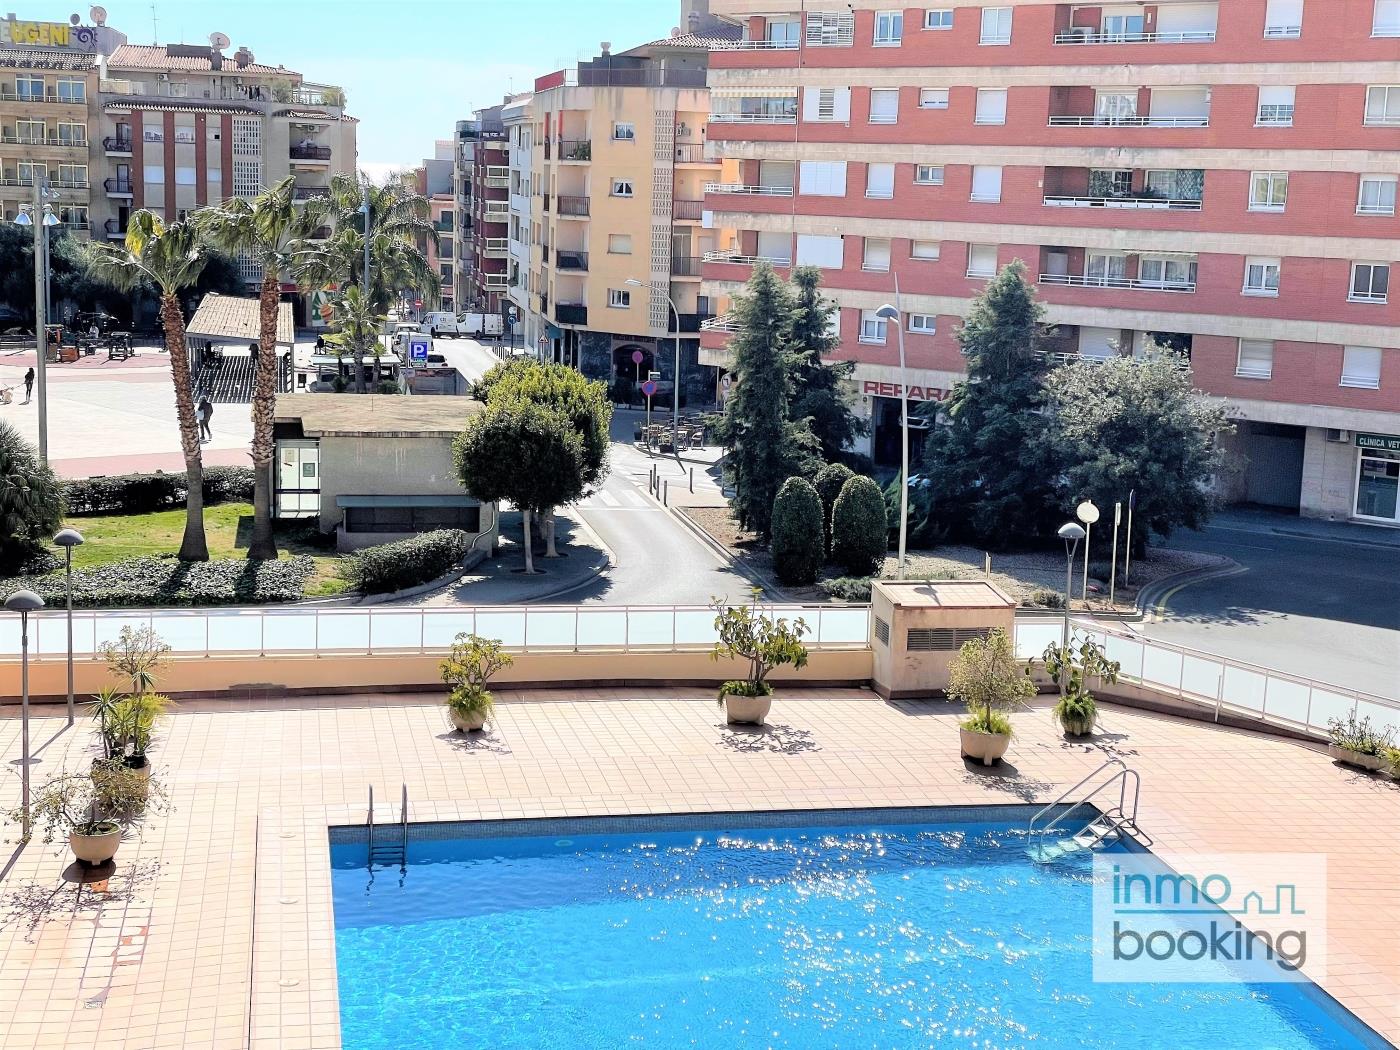 InmoBooking Olimar, central, air-conditioned and with pool in Vinyols i els arcs